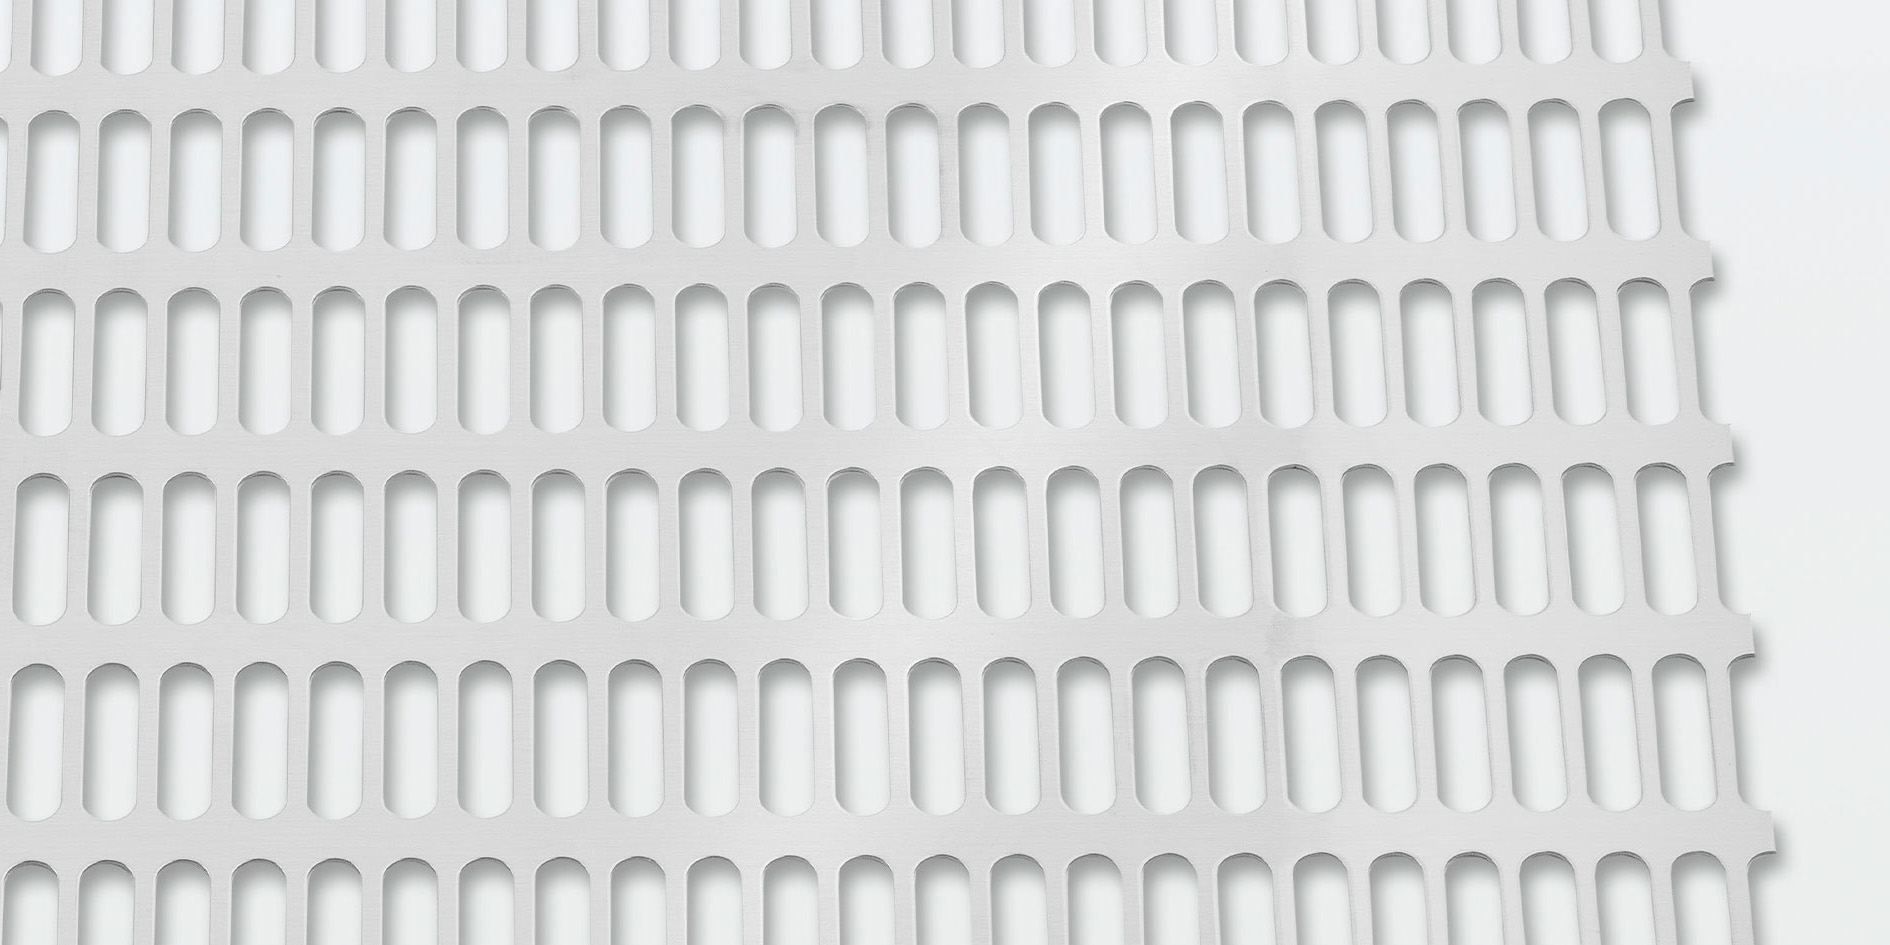 Sheet with oblong perforations